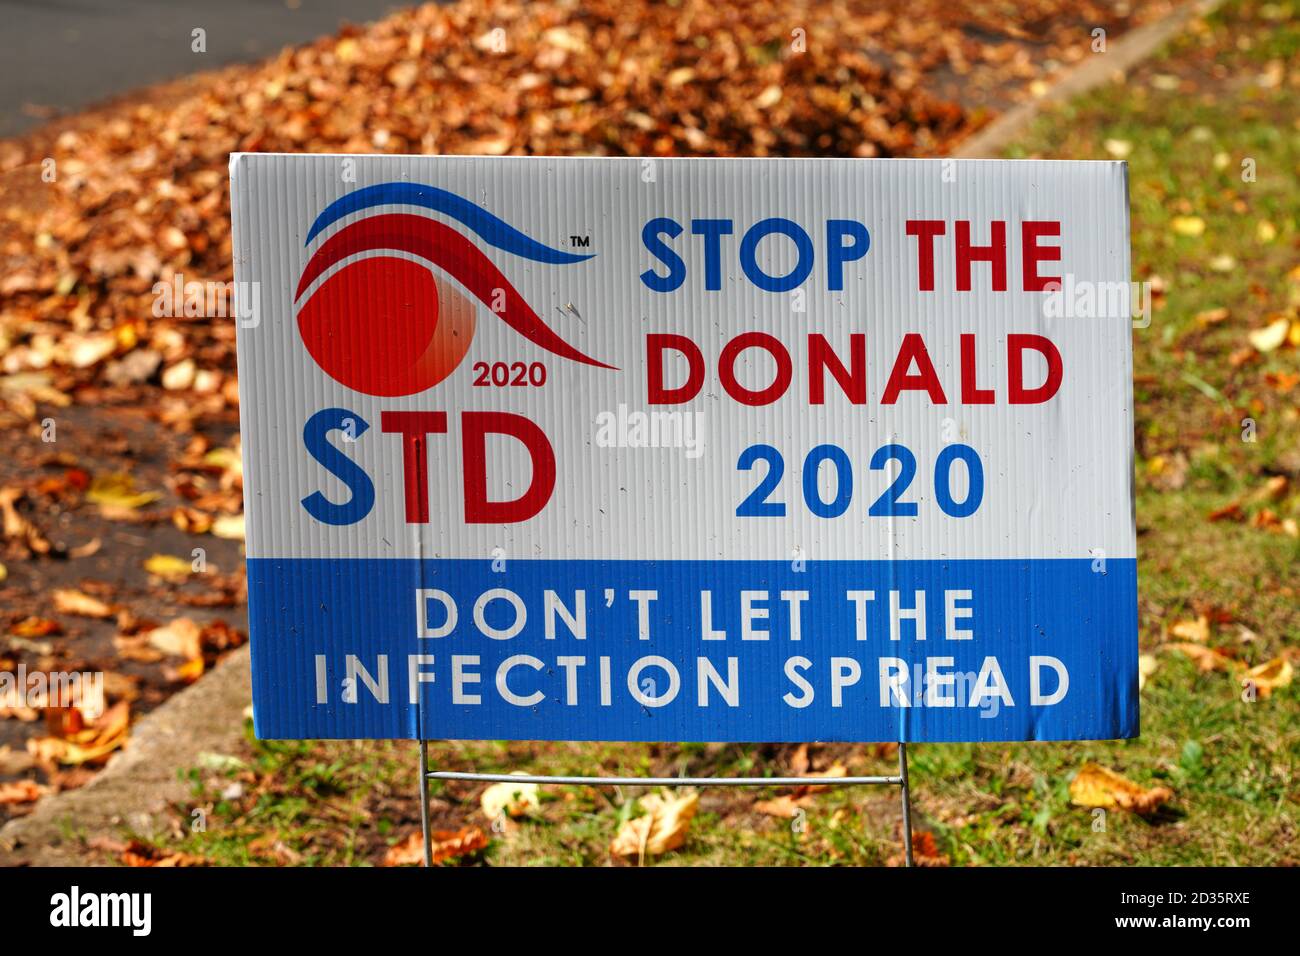 PRINCETON, NJ -2 OCT 2020- View of a political lawn sign saying STD Stop the Donald 2020 during the 2020 presidential campaign on the street in New Je Stock Photo